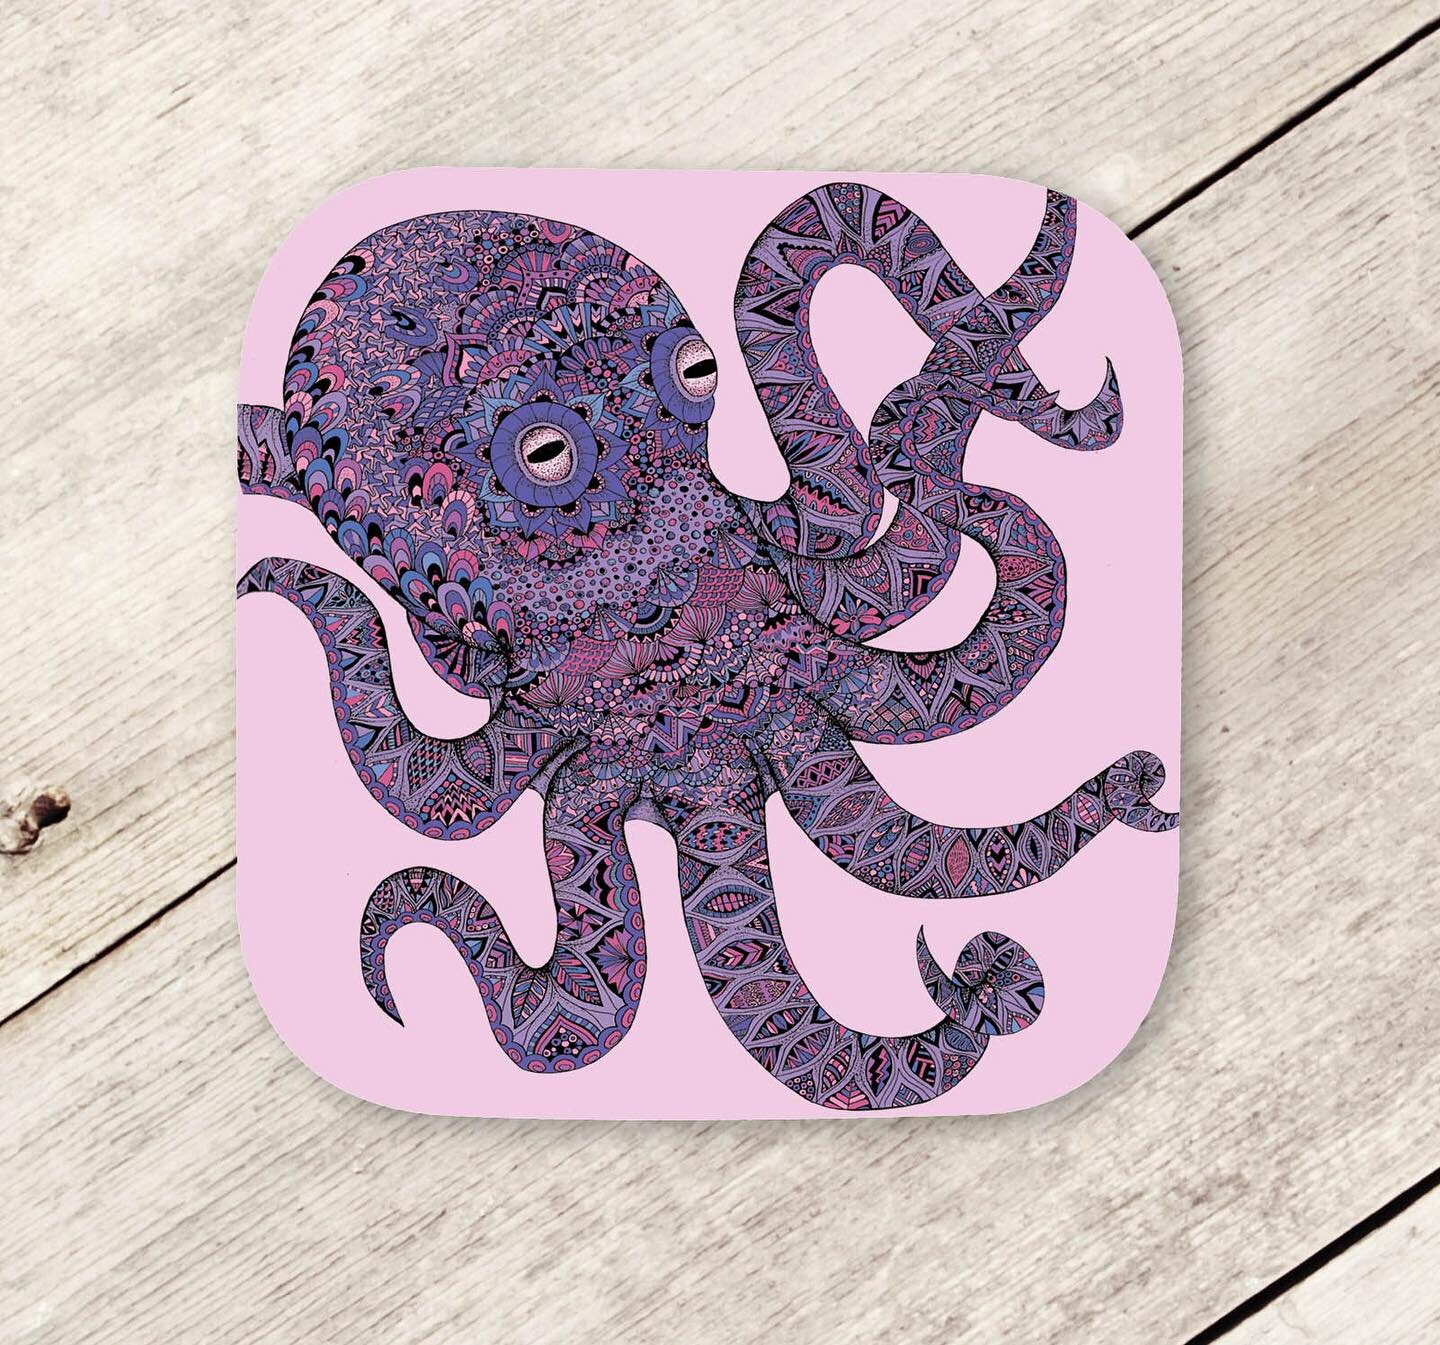 One of my newer designs, which has been a hit with my customers #octopuslove #octopus🐙